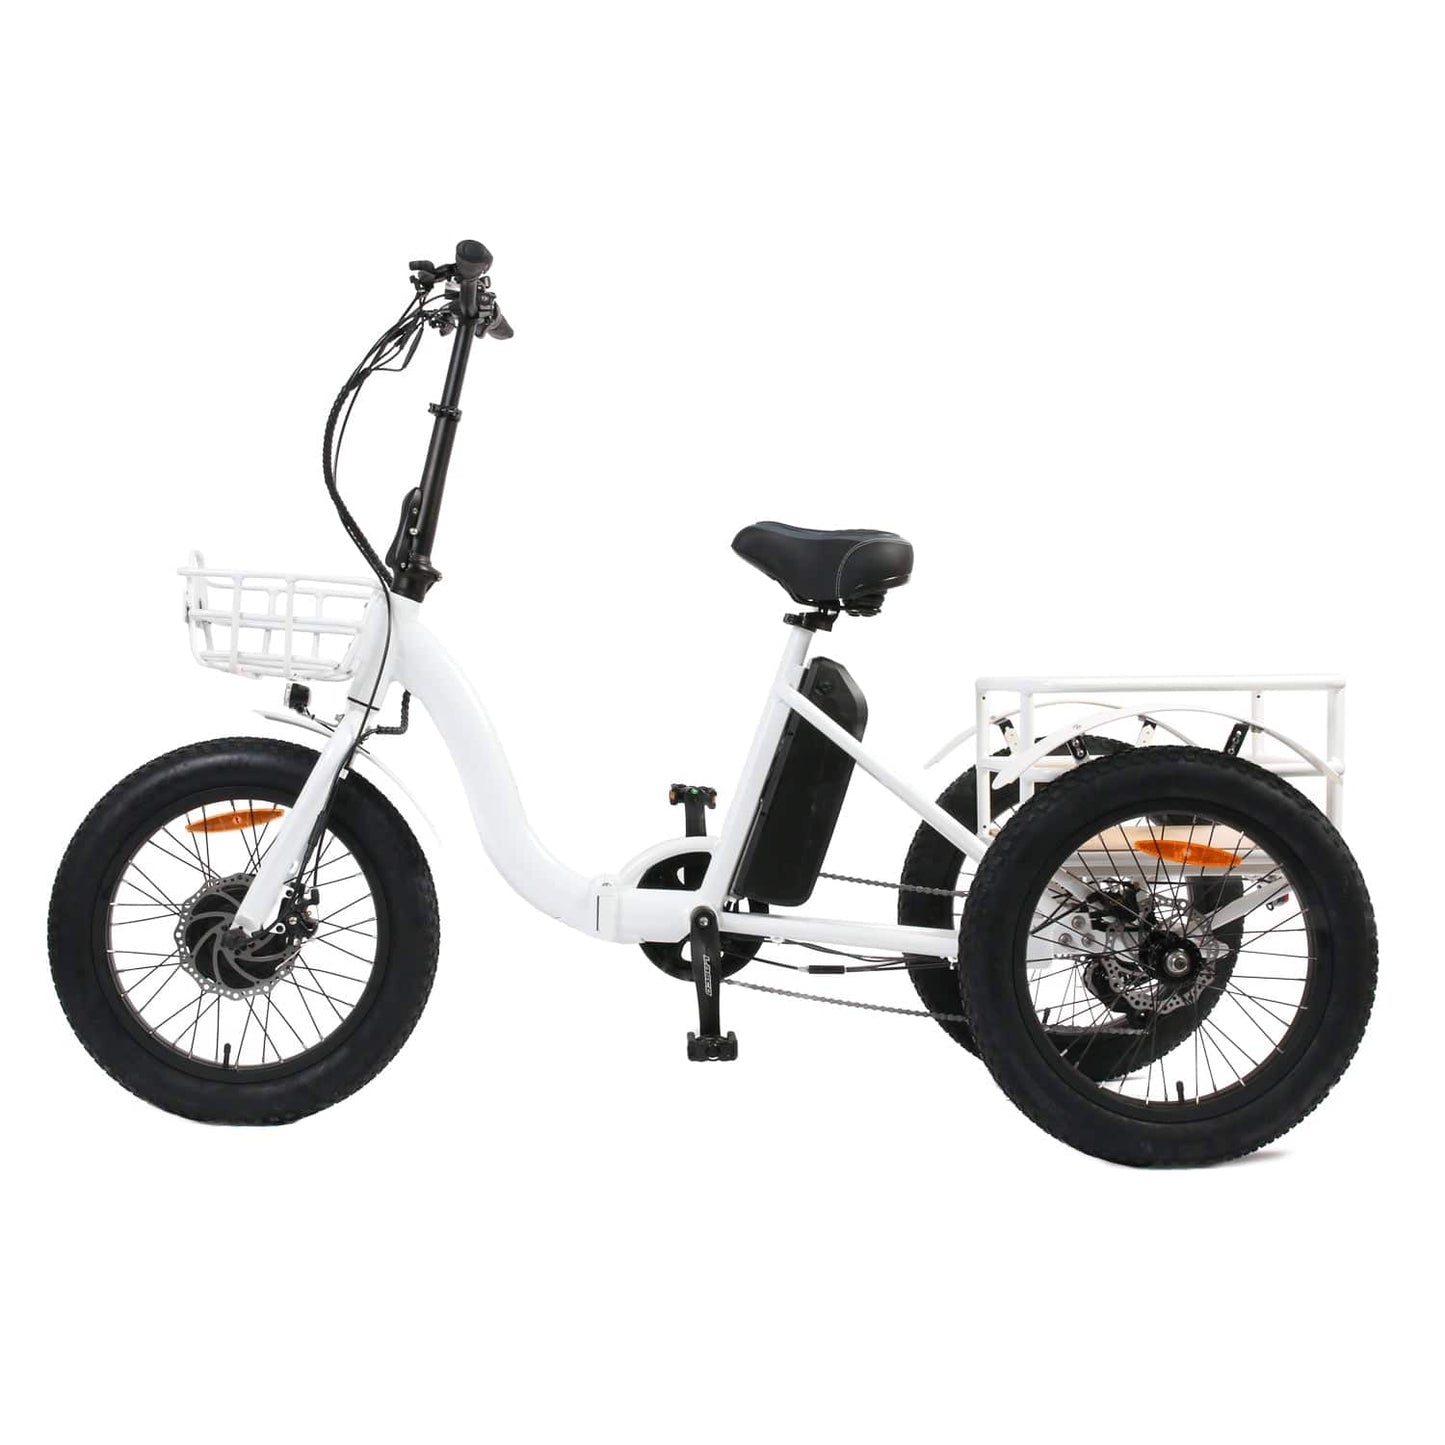 NEW-TRIKE Folding Electric Tricycle